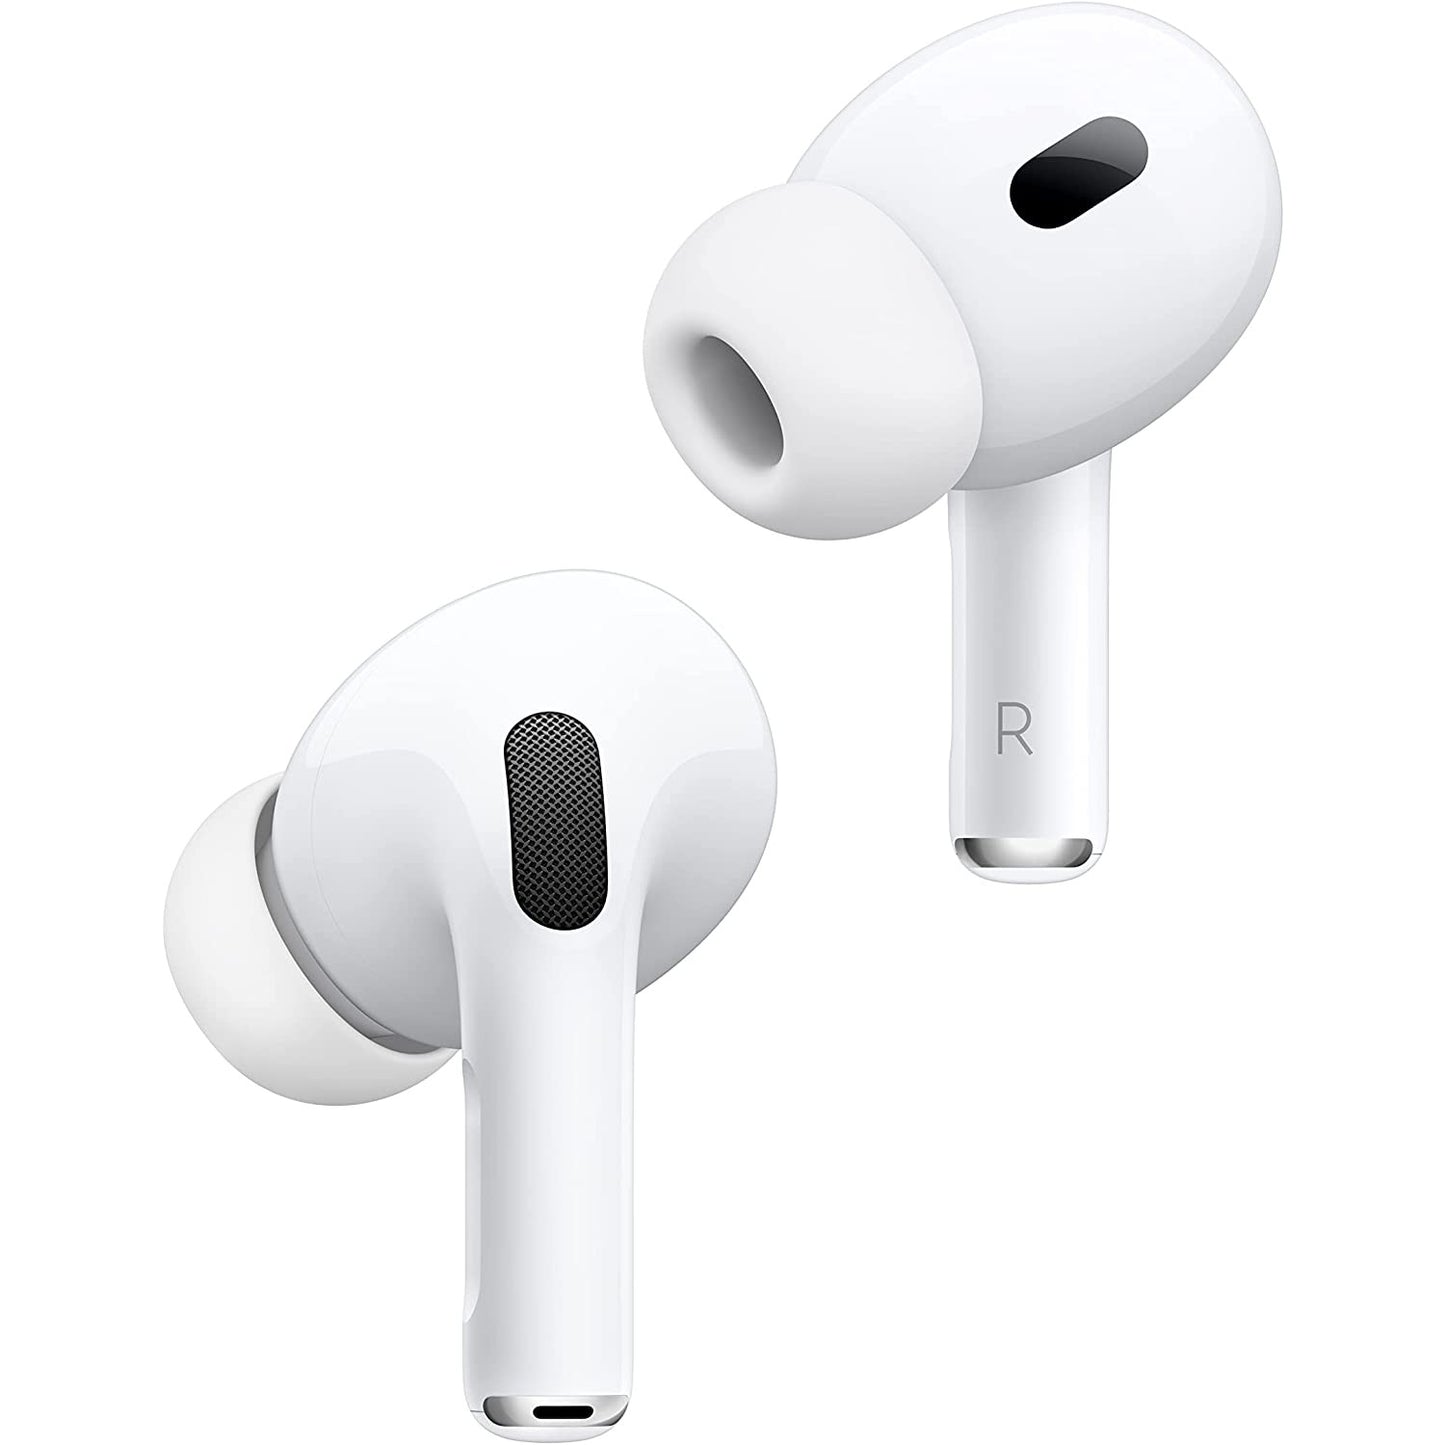 A left and right Apple AirPod earbud set.